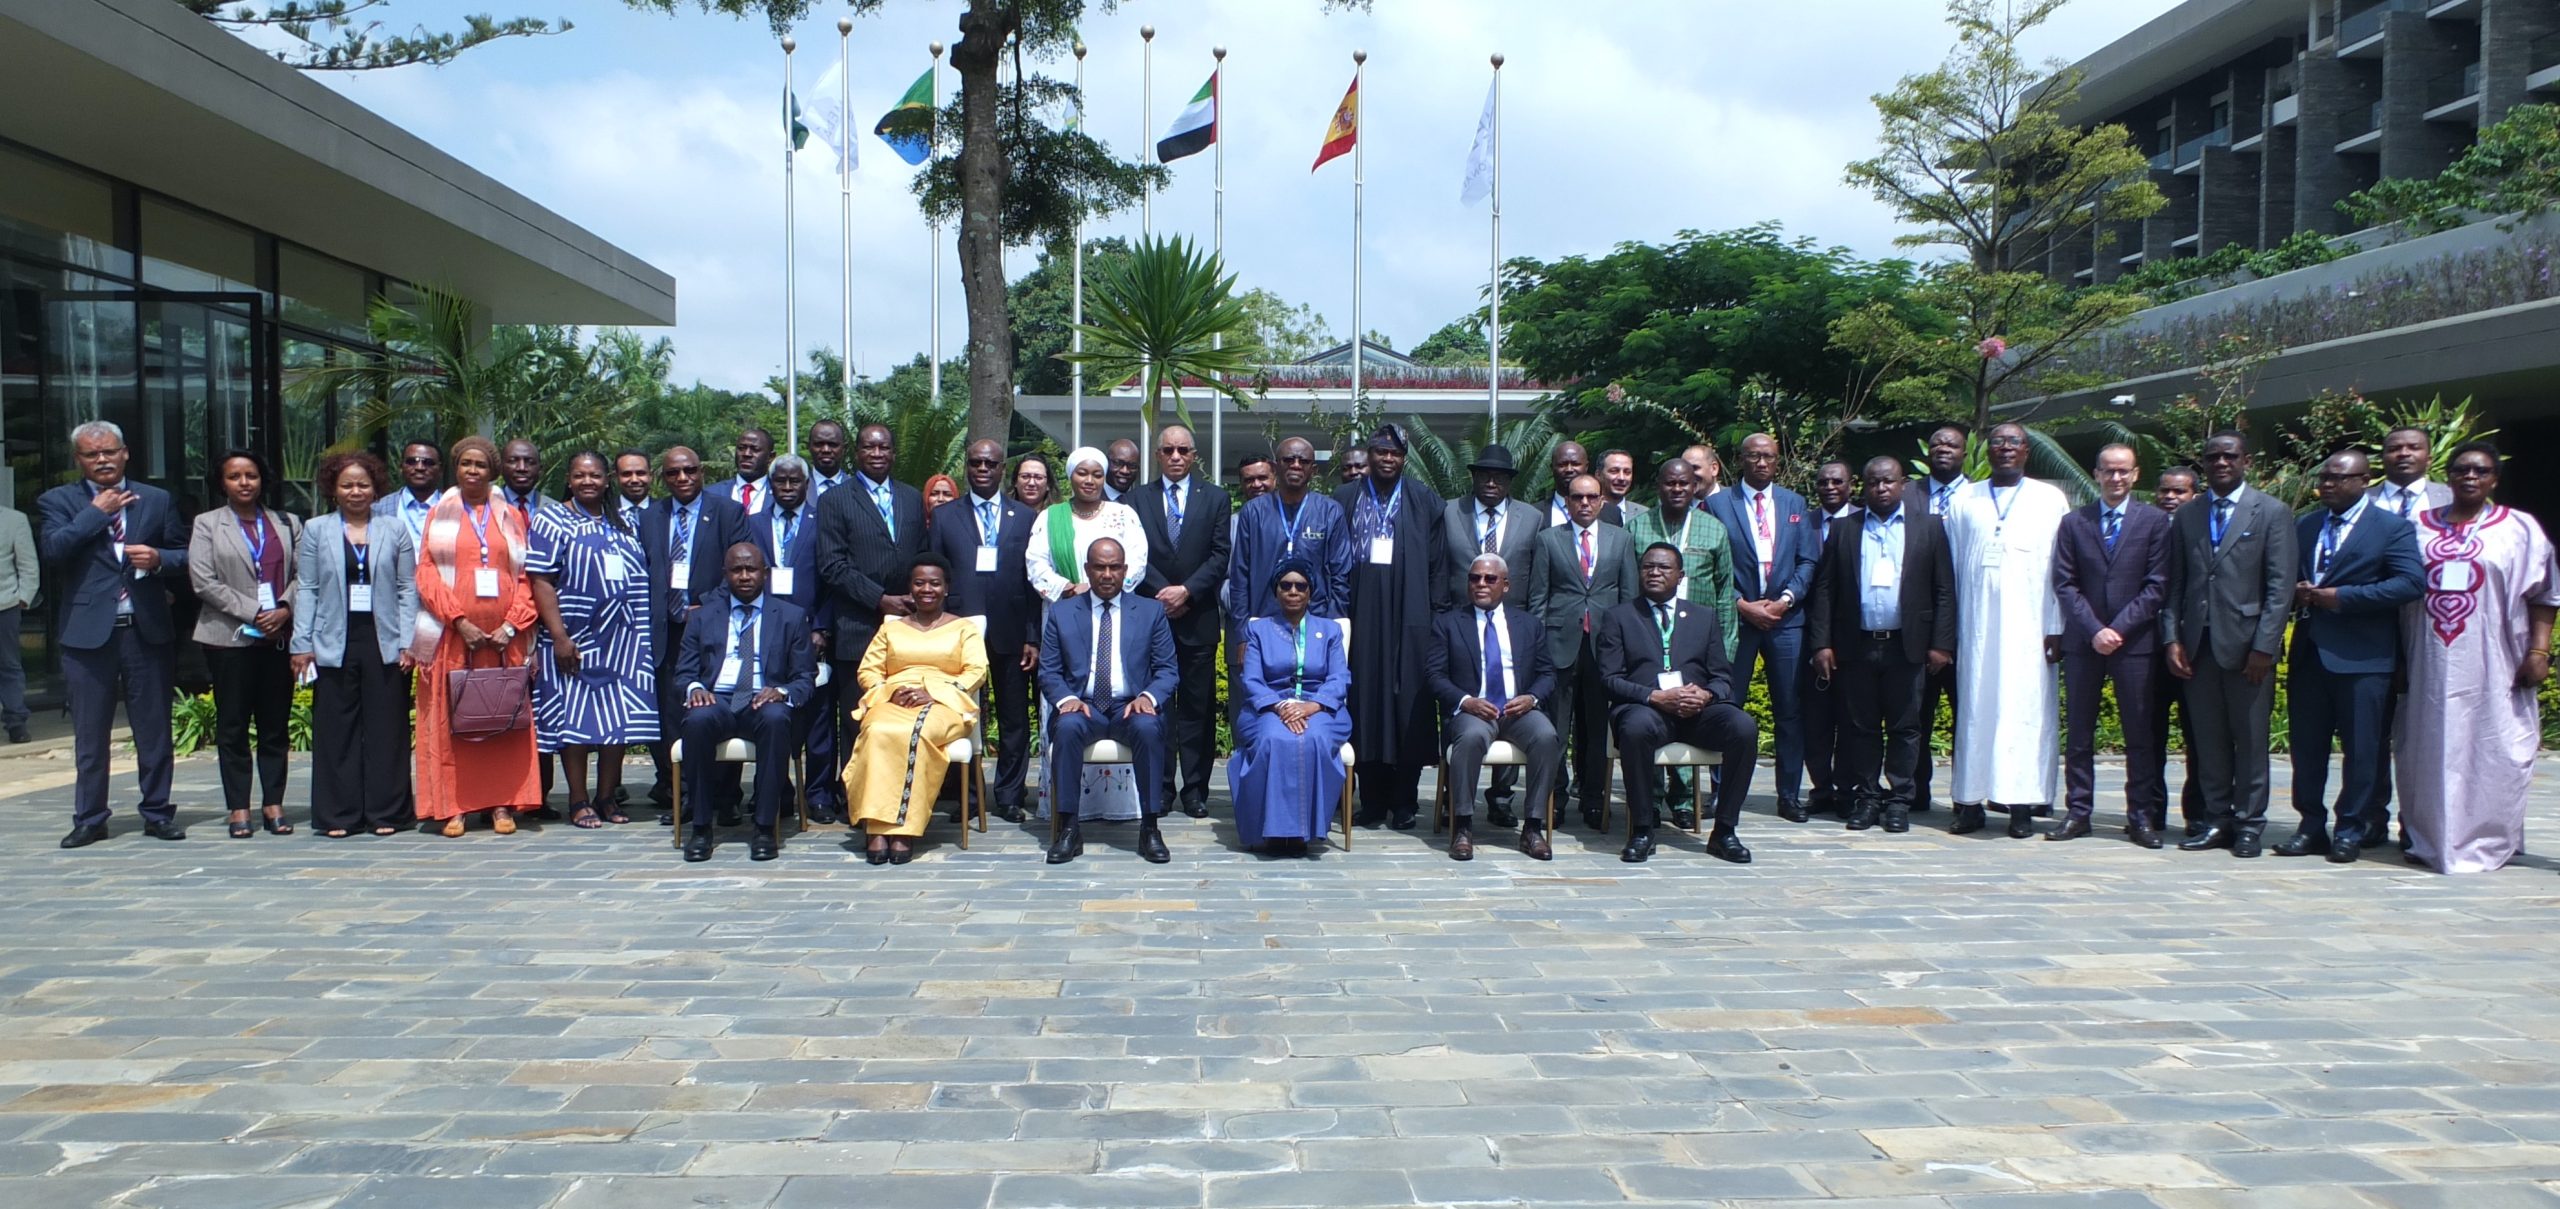 THE JOINT RETREAT OF THE AFRICAN COURT AND THE PERMANENT REPRESENTATIVES TO THE AU STARTS IN ARUSHA